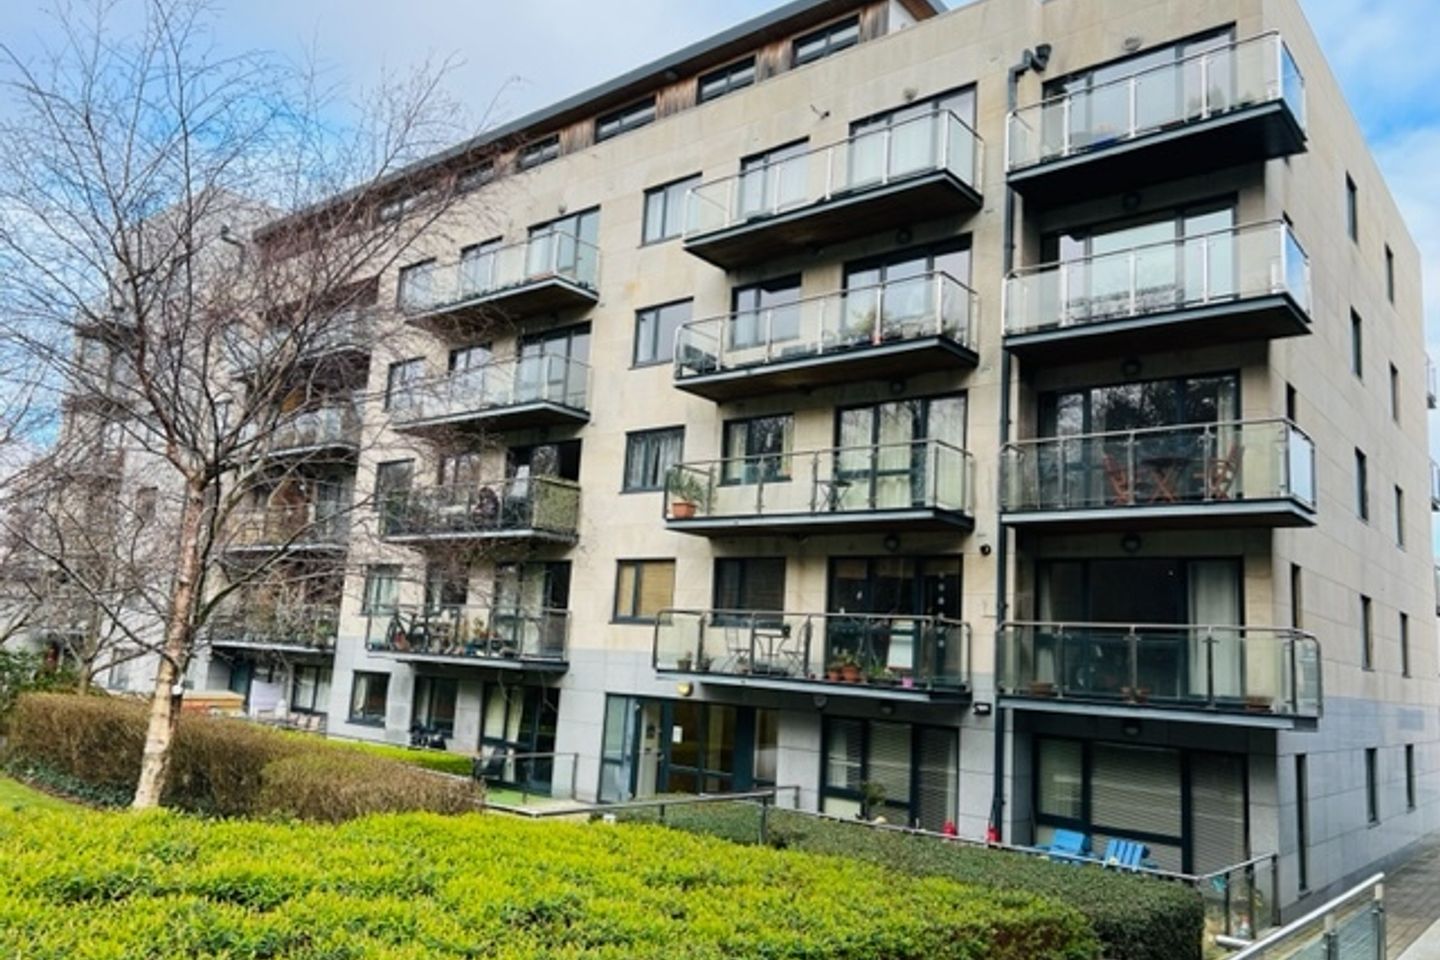 Apartment 40, The Sycamore, Parkview, Stepaside, Dublin 18